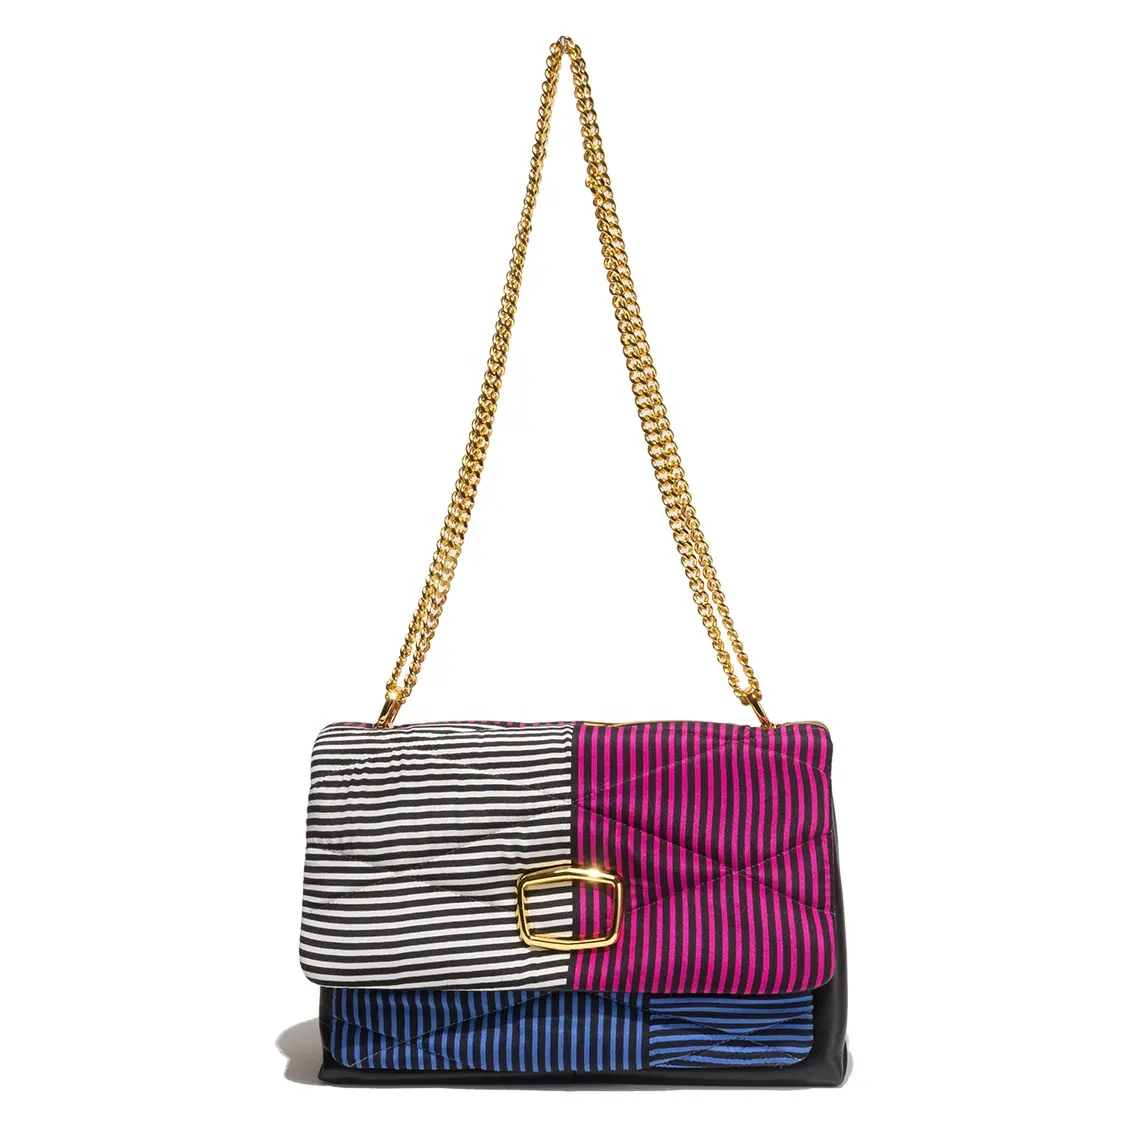 Ladies unique fashion luxury shoulder crossbody bag made in Italy with signature vintage silk scarf colourful stripes